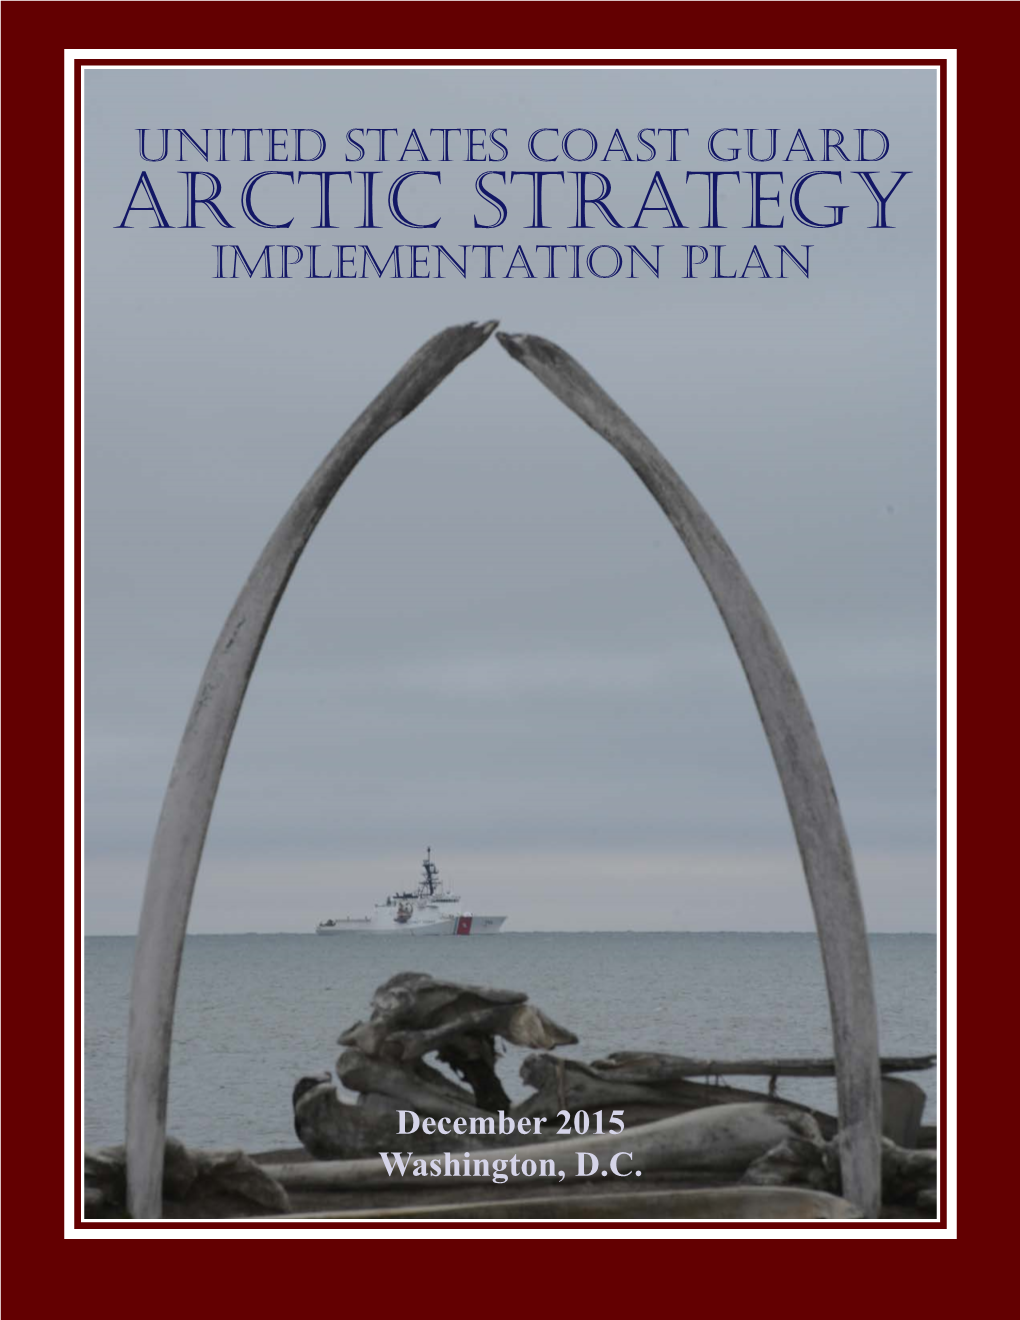 Arctic Strategy Implementation Plan